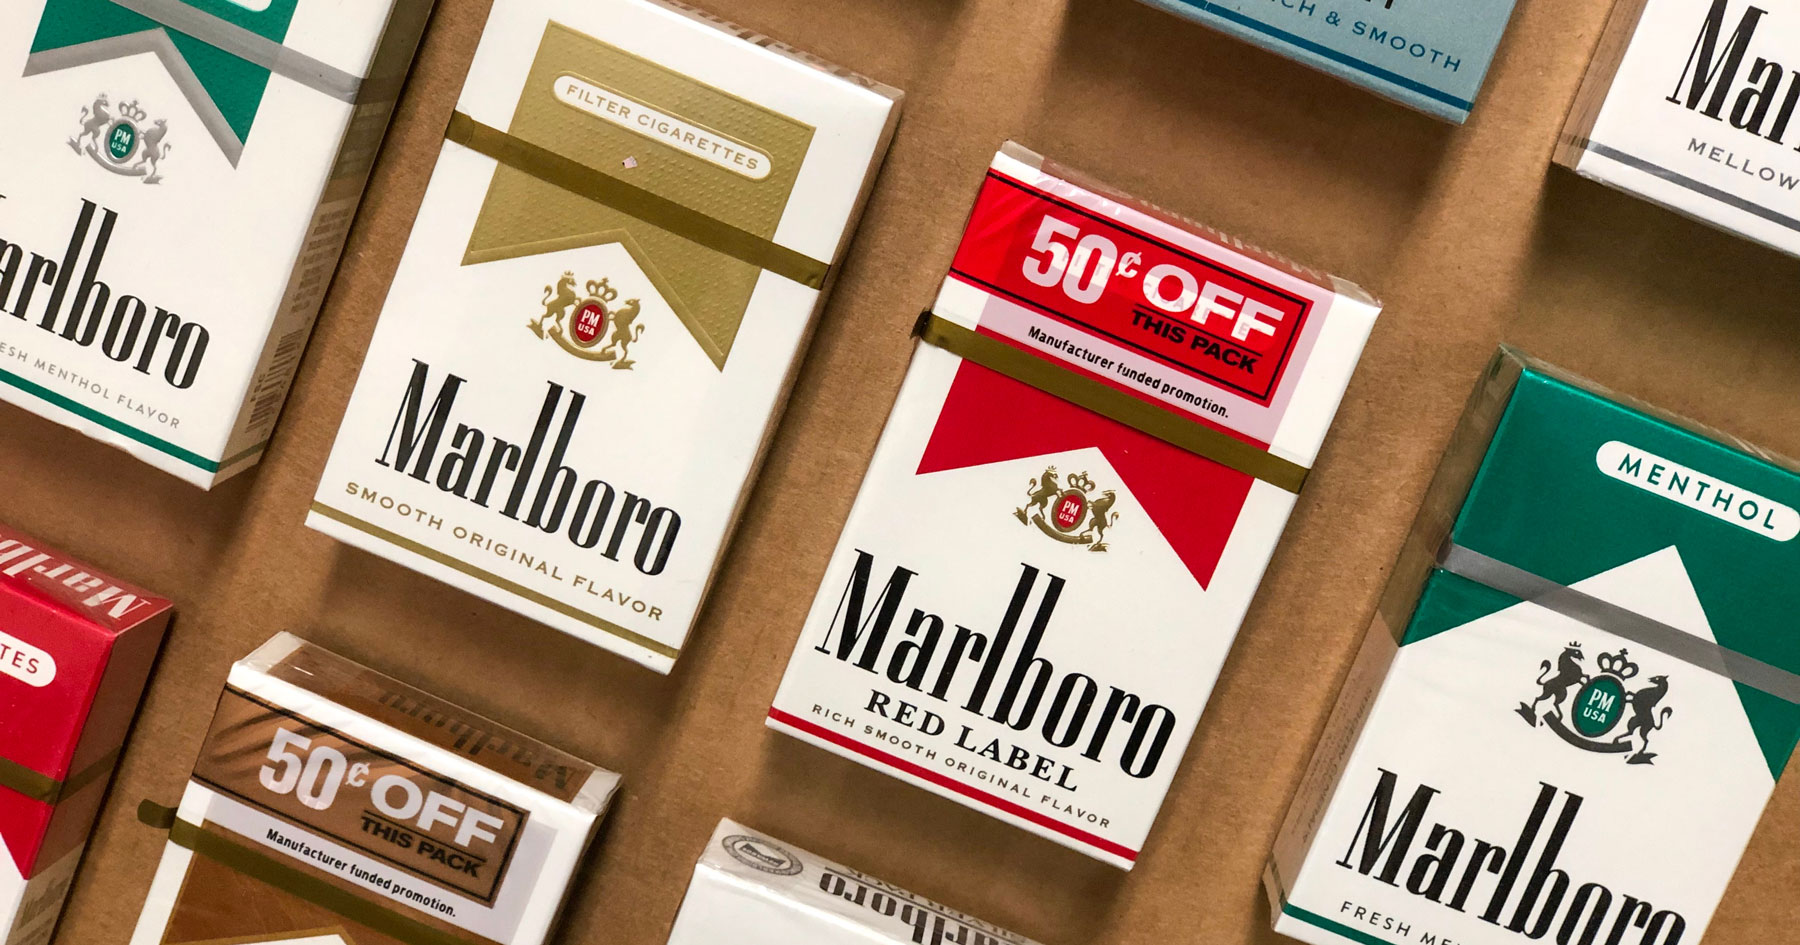 13-facts-about-marlboro